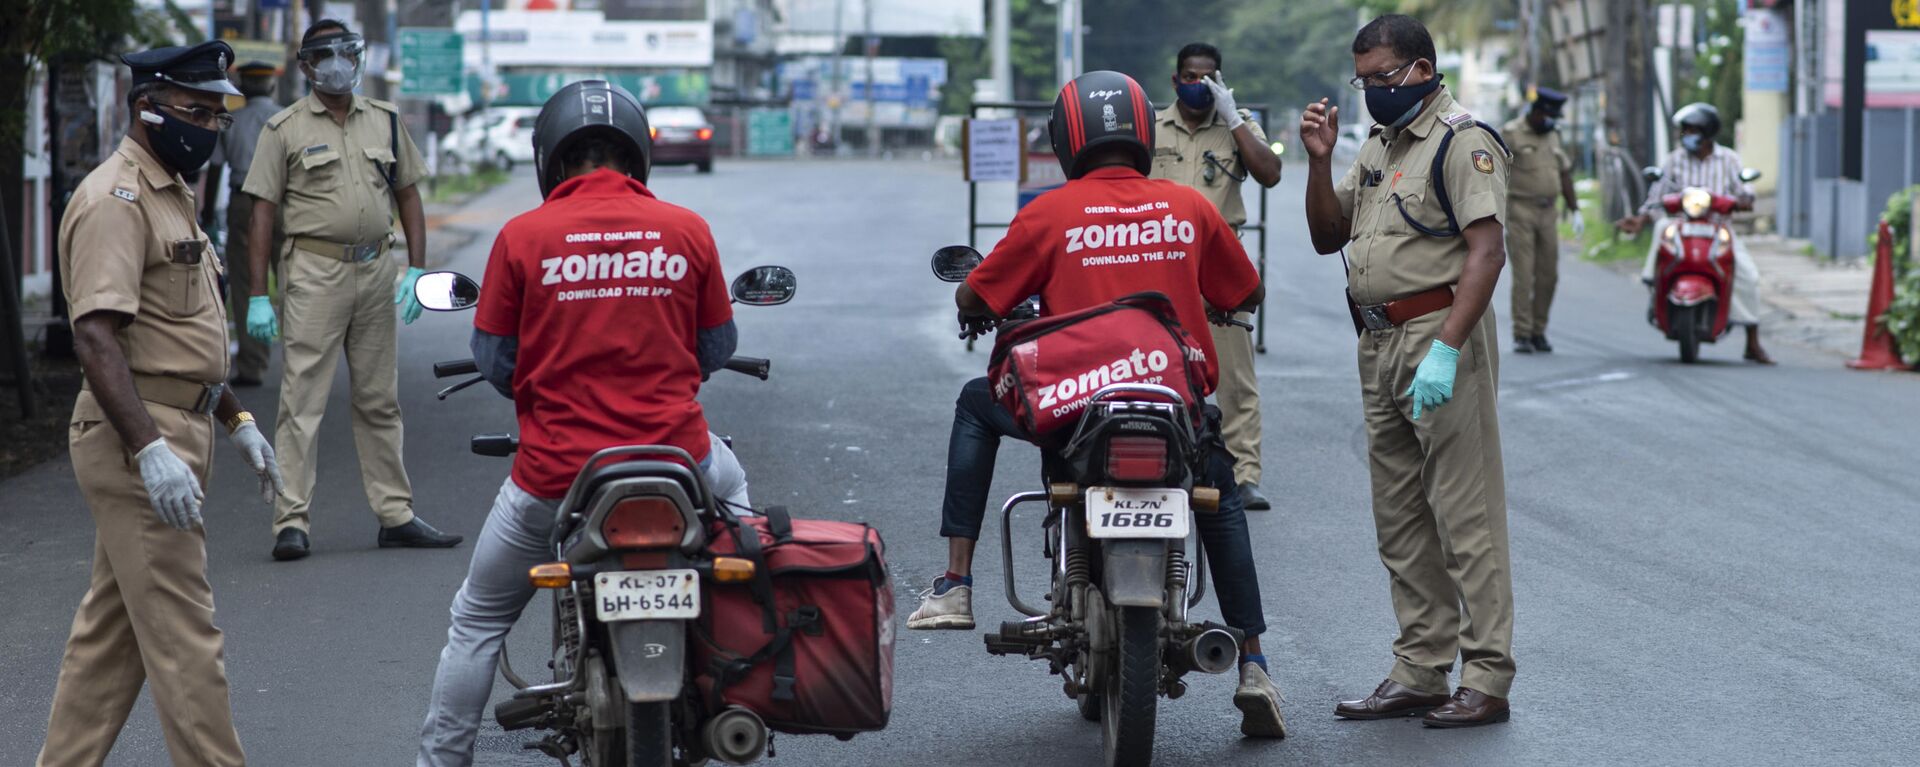 Policemen check the credentials of food delivery personnel during a lockdown imposed to curb the spread of coronavirus in Kochi, Kerala state, India, Saturday, May 8, 2021 - Sputnik International, 1920, 07.09.2021